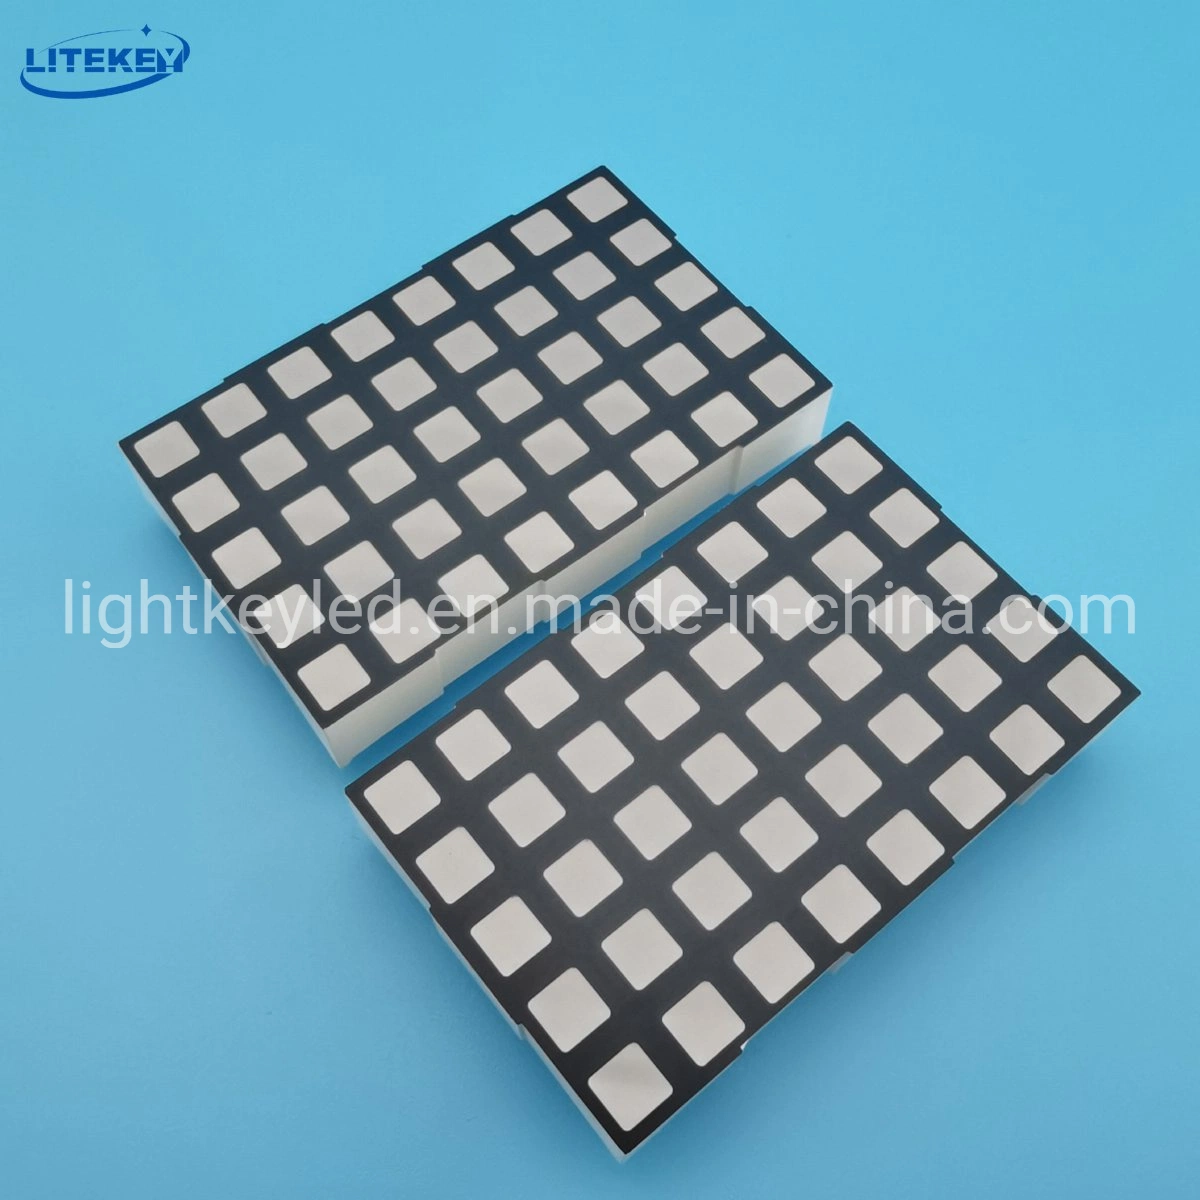 1.4 Inch 5X7 Dual Color Square DOT LED DOT Matrix with RoHS From Expert Manufacturer